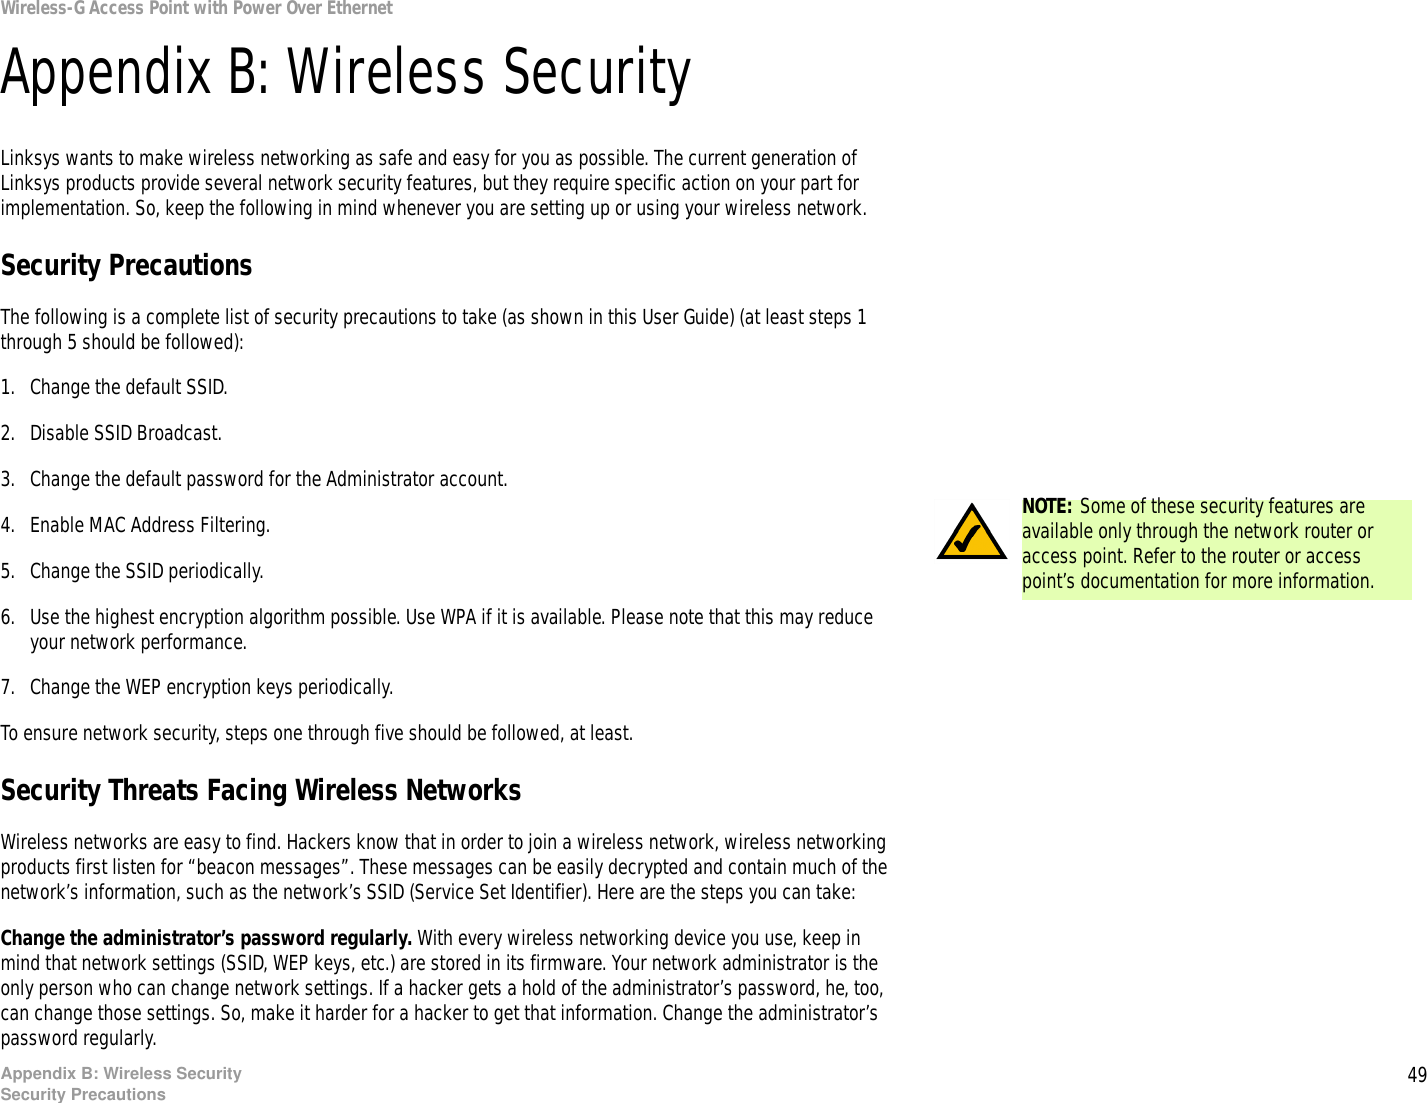 49Appendix B: Wireless SecuritySecurity PrecautionsWireless-G Access Point with Power Over EthernetAppendix B: Wireless SecurityLinksys wants to make wireless networking as safe and easy for you as possible. The current generation of Linksys products provide several network security features, but they require specific action on your part for implementation. So, keep the following in mind whenever you are setting up or using your wireless network.Security PrecautionsThe following is a complete list of security precautions to take (as shown in this User Guide) (at least steps 1 through 5 should be followed):1. Change the default SSID. 2. Disable SSID Broadcast. 3. Change the default password for the Administrator account. 4. Enable MAC Address Filtering. 5. Change the SSID periodically. 6. Use the highest encryption algorithm possible. Use WPA if it is available. Please note that this may reduce your network performance. 7. Change the WEP encryption keys periodically. To ensure network security, steps one through five should be followed, at least.Security Threats Facing Wireless Networks Wireless networks are easy to find. Hackers know that in order to join a wireless network, wireless networking products first listen for “beacon messages”. These messages can be easily decrypted and contain much of the network’s information, such as the network’s SSID (Service Set Identifier). Here are the steps you can take:Change the administrator’s password regularly. With every wireless networking device you use, keep in mind that network settings (SSID, WEP keys, etc.) are stored in its firmware. Your network administrator is the only person who can change network settings. If a hacker gets a hold of the administrator’s password, he, too, can change those settings. So, make it harder for a hacker to get that information. Change the administrator’s password regularly.NOTE: Some of these security features are available only through the network router or access point. Refer to the router or access point’s documentation for more information.